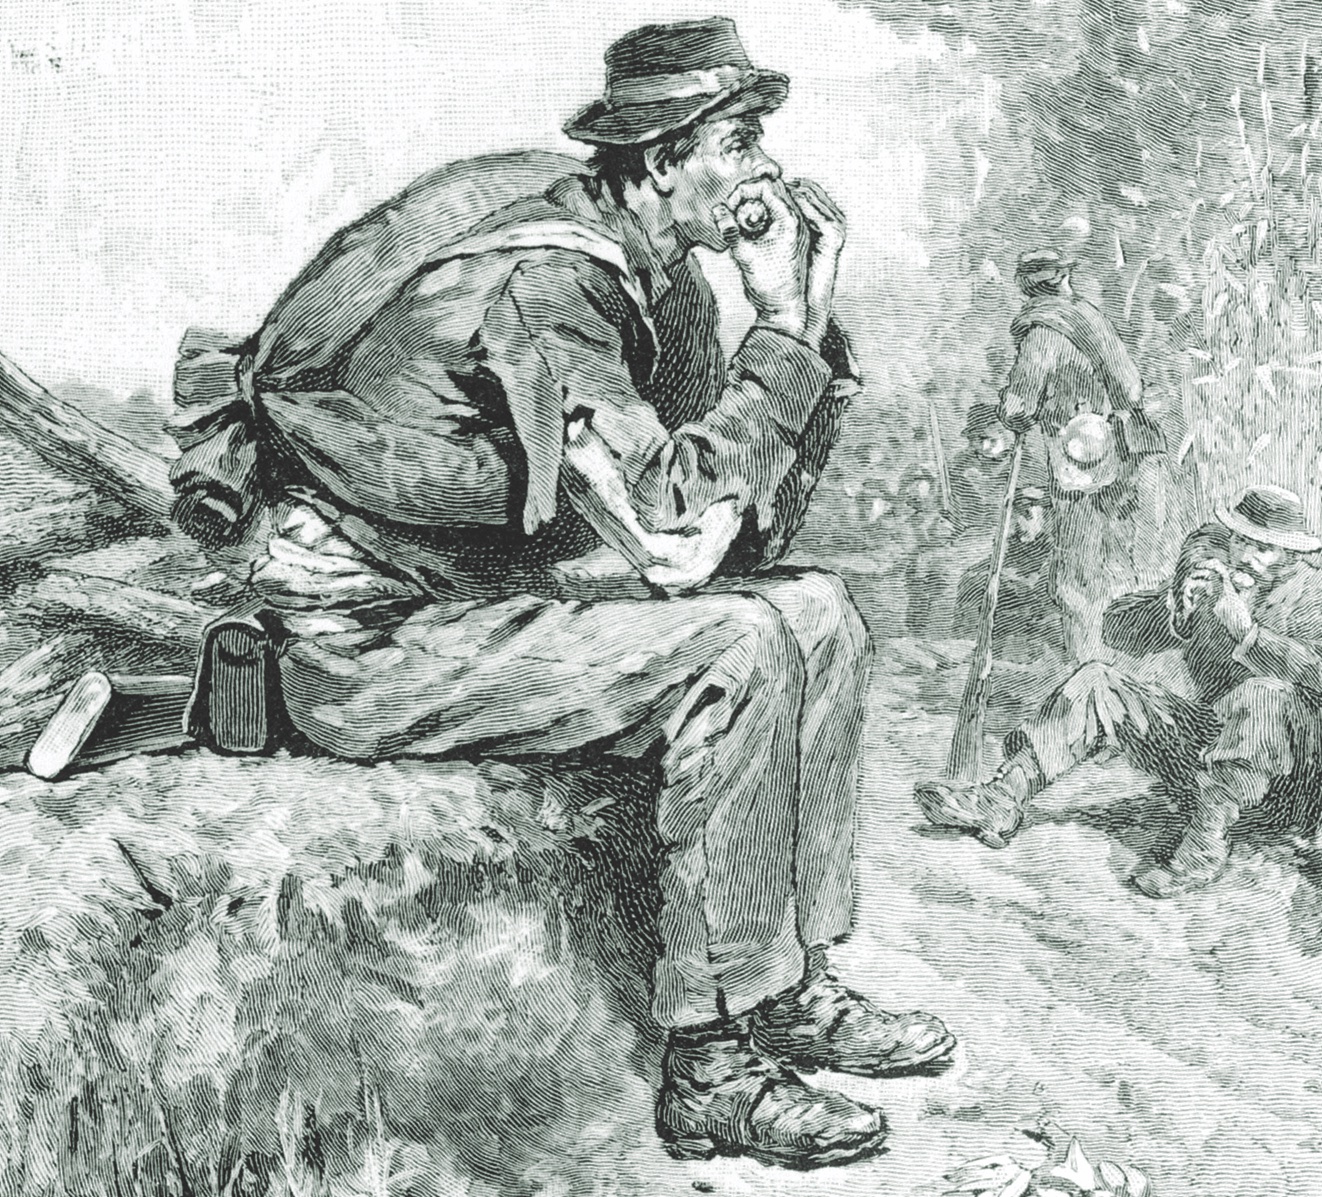 A Rebel soldier gnaws on a corn cob during the 1862 Maryland Campaign. As Hunter would note, limited or nonexistent rations was a dire problem for Lee’s army during its march to Sharpsburg. (Pictorial Press/Alamy Stock Photo)